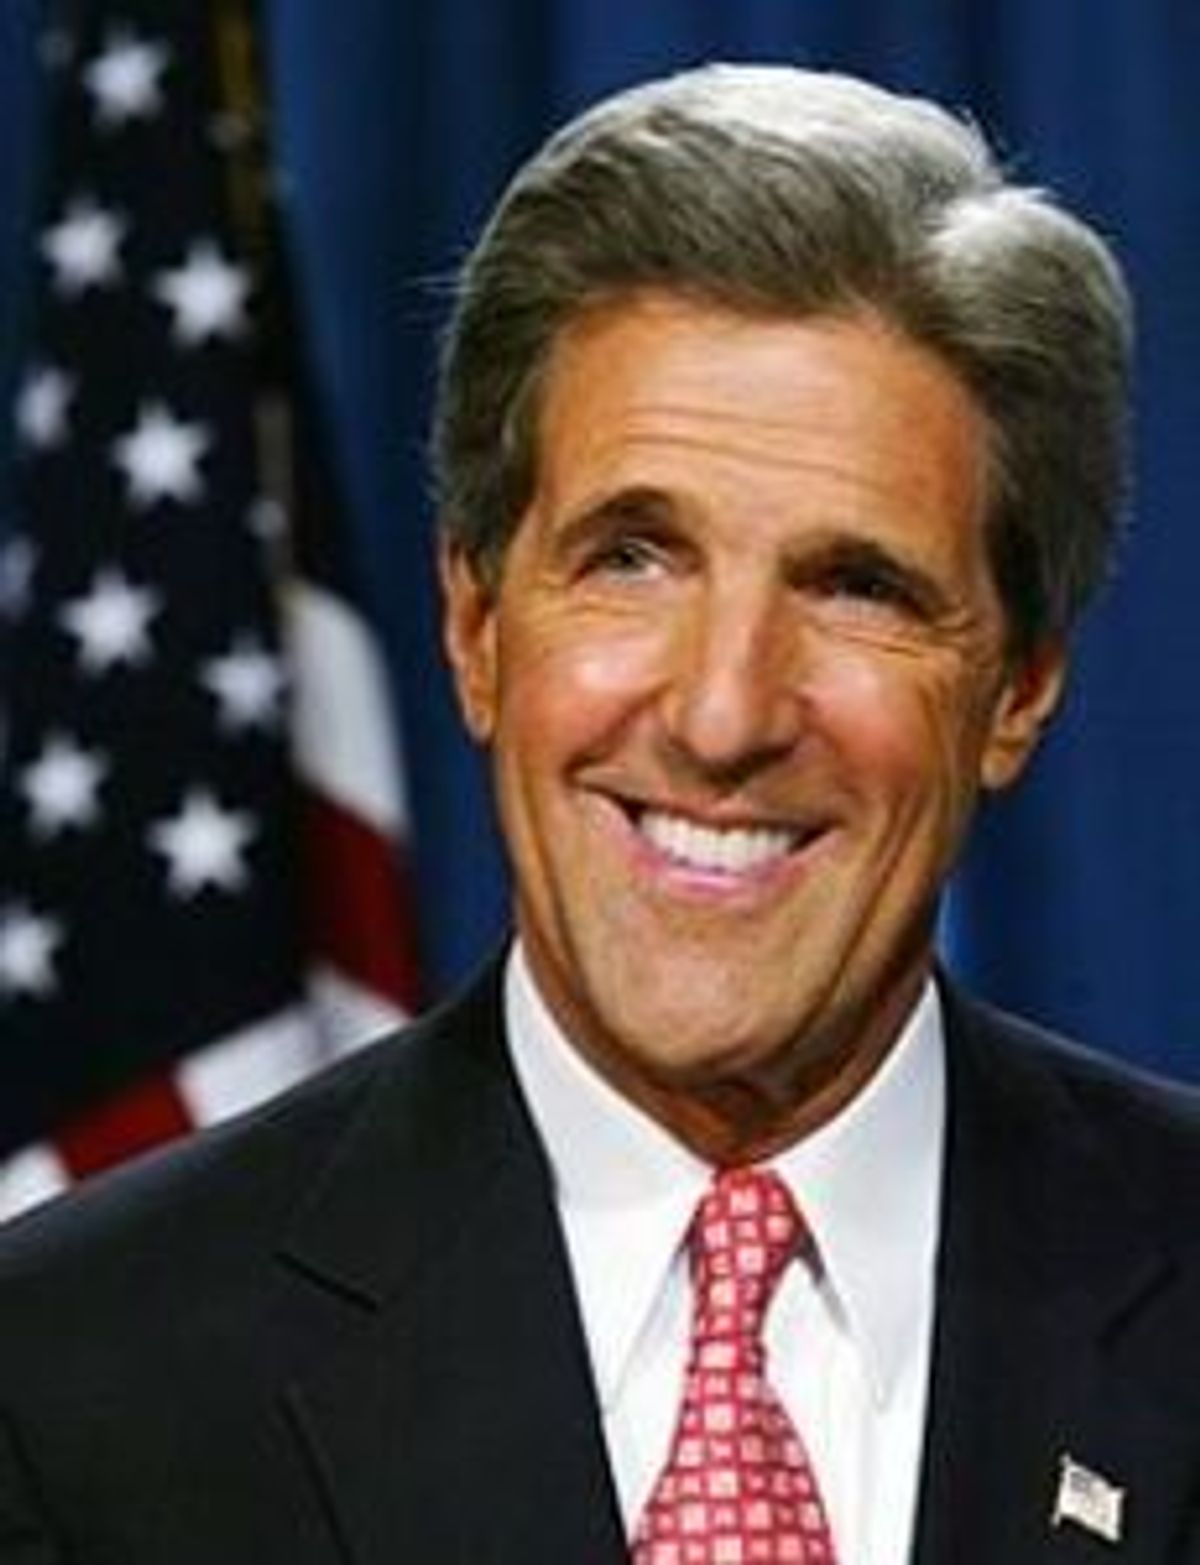 Kerry and Climate